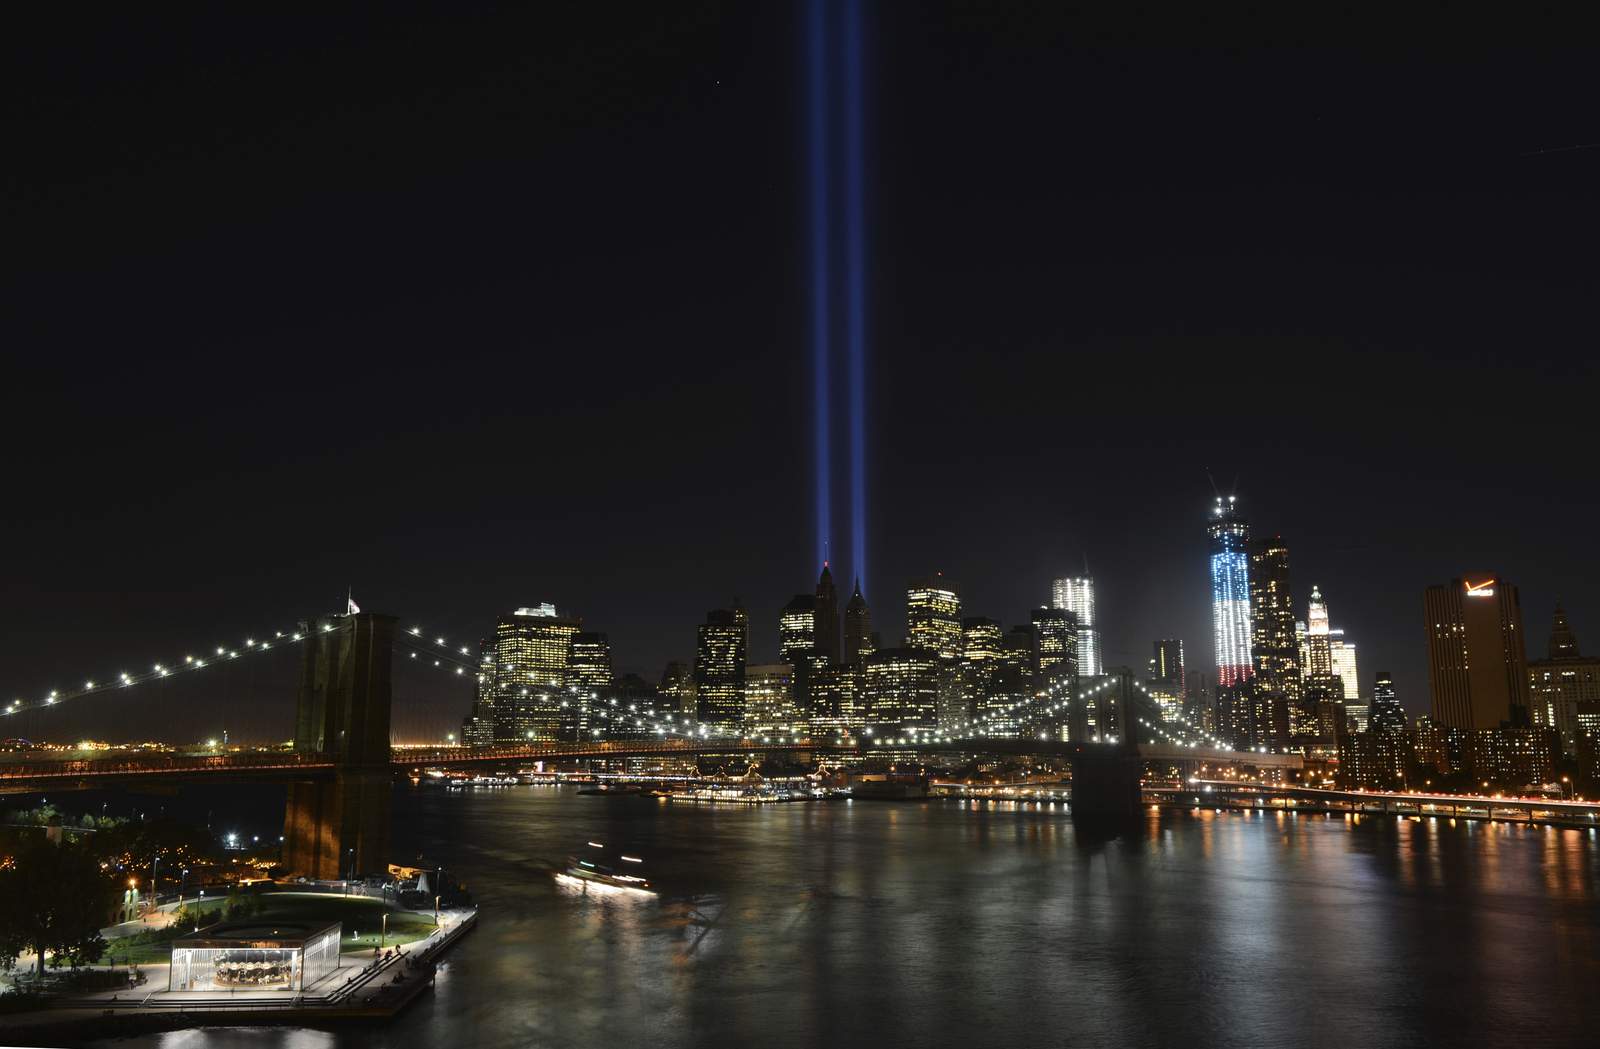 Cuomo: Health workers to supervise annual 9/11 light tribute